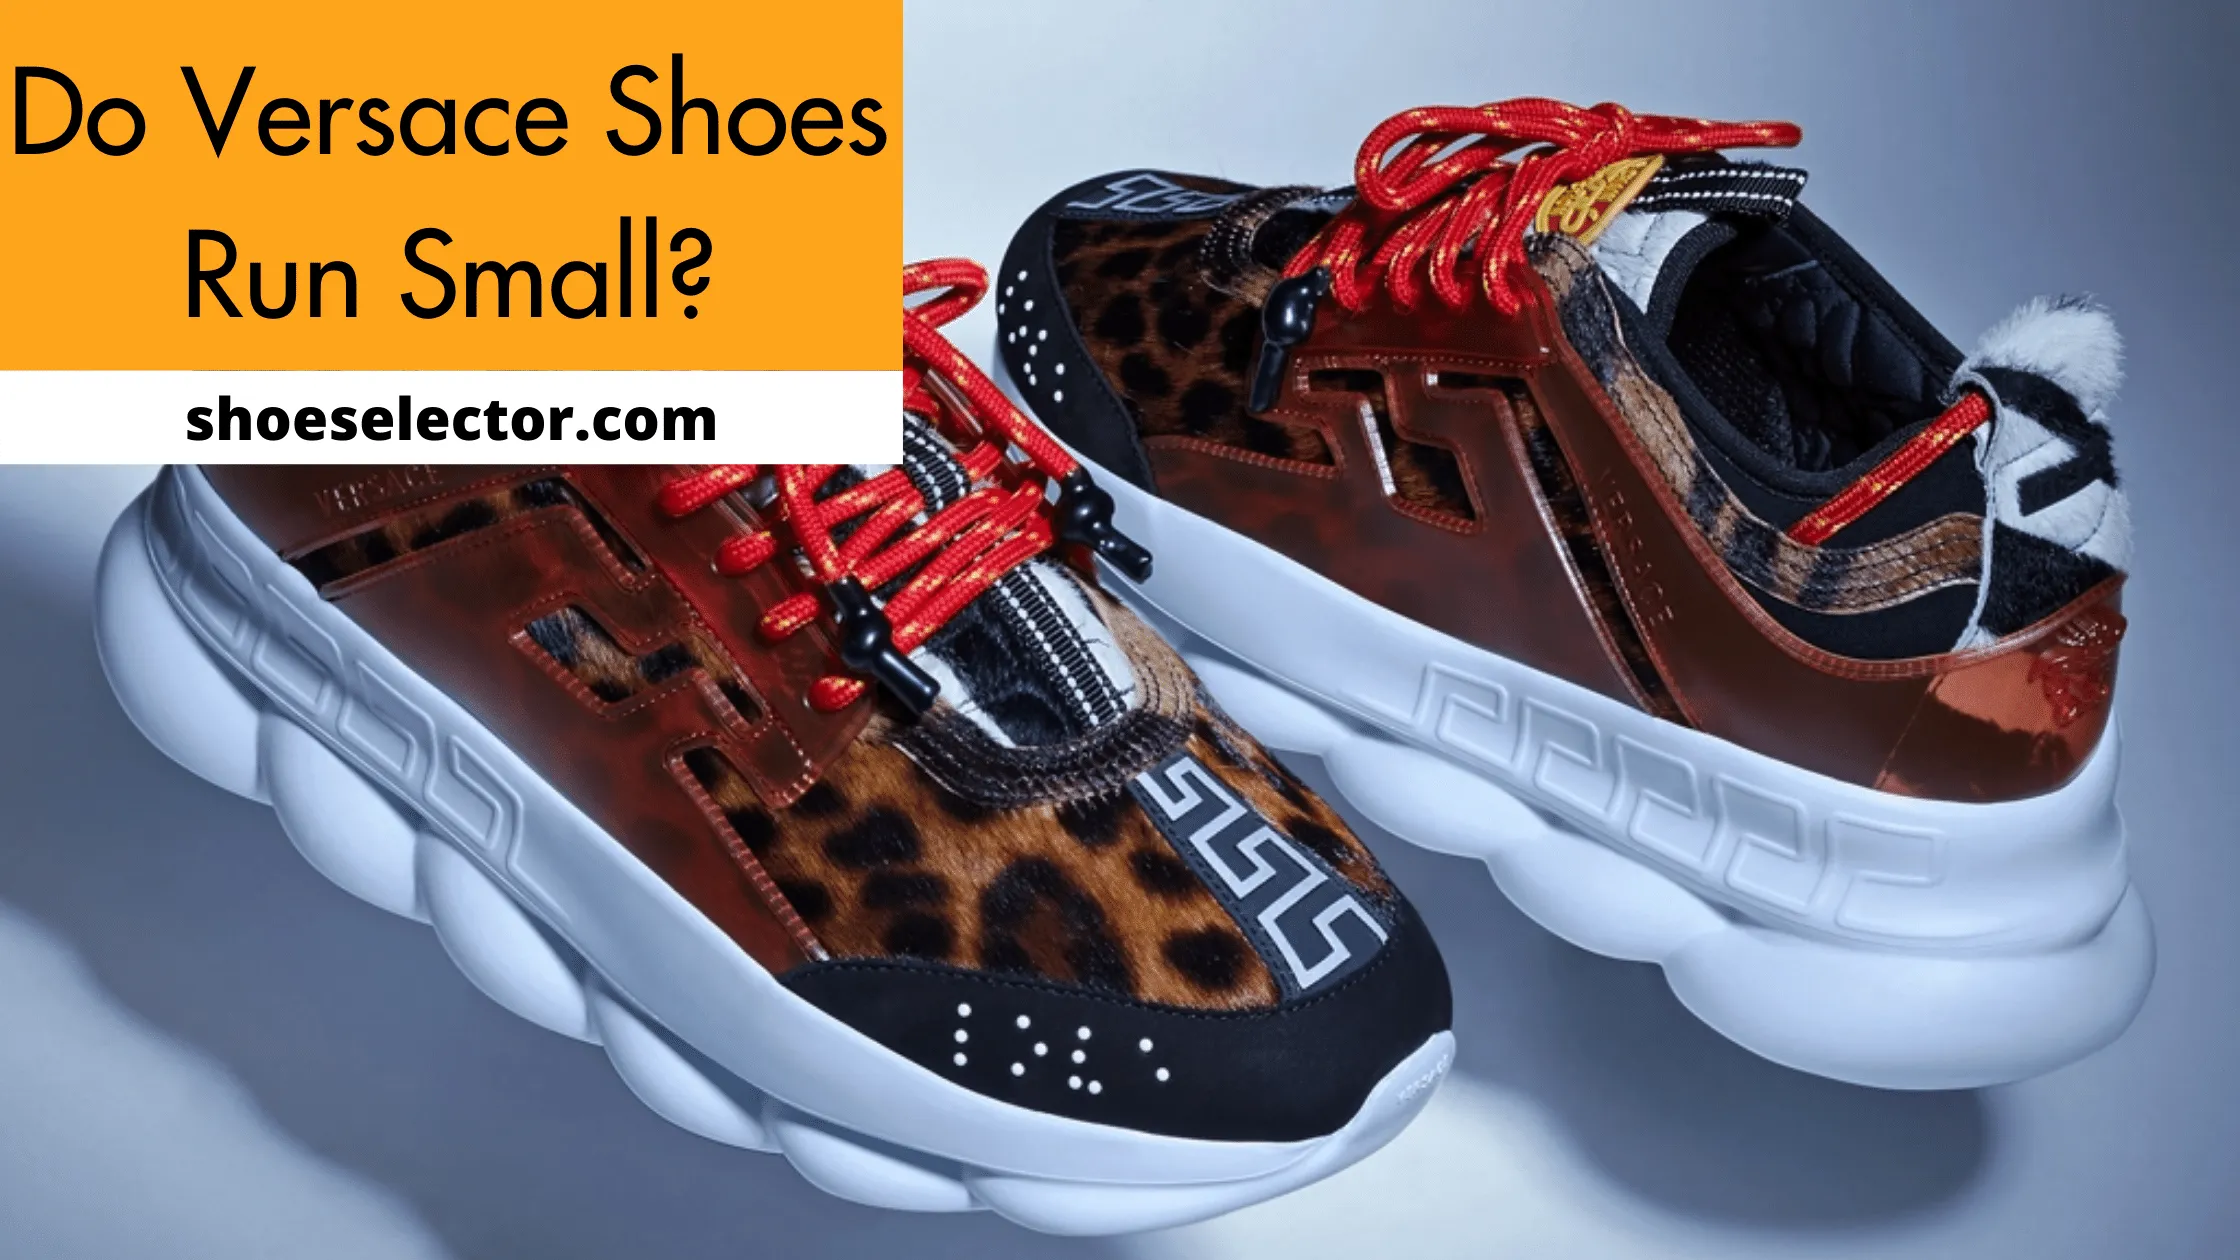 Do Versace Shoes Run Small? - Simple Guide